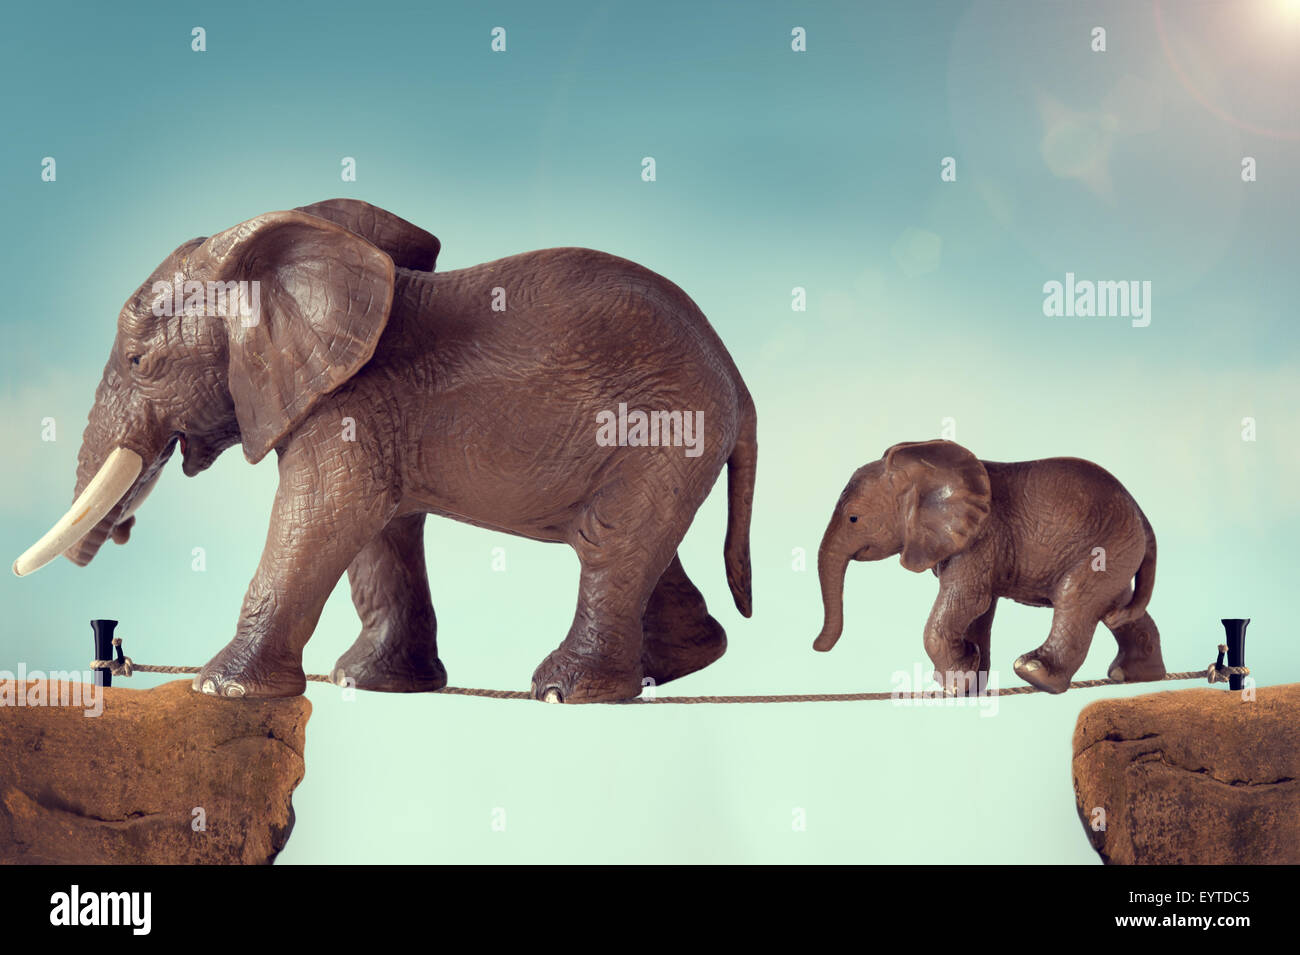 mother and baby elephant family balancing on a tightrope or highwire Stock Photo